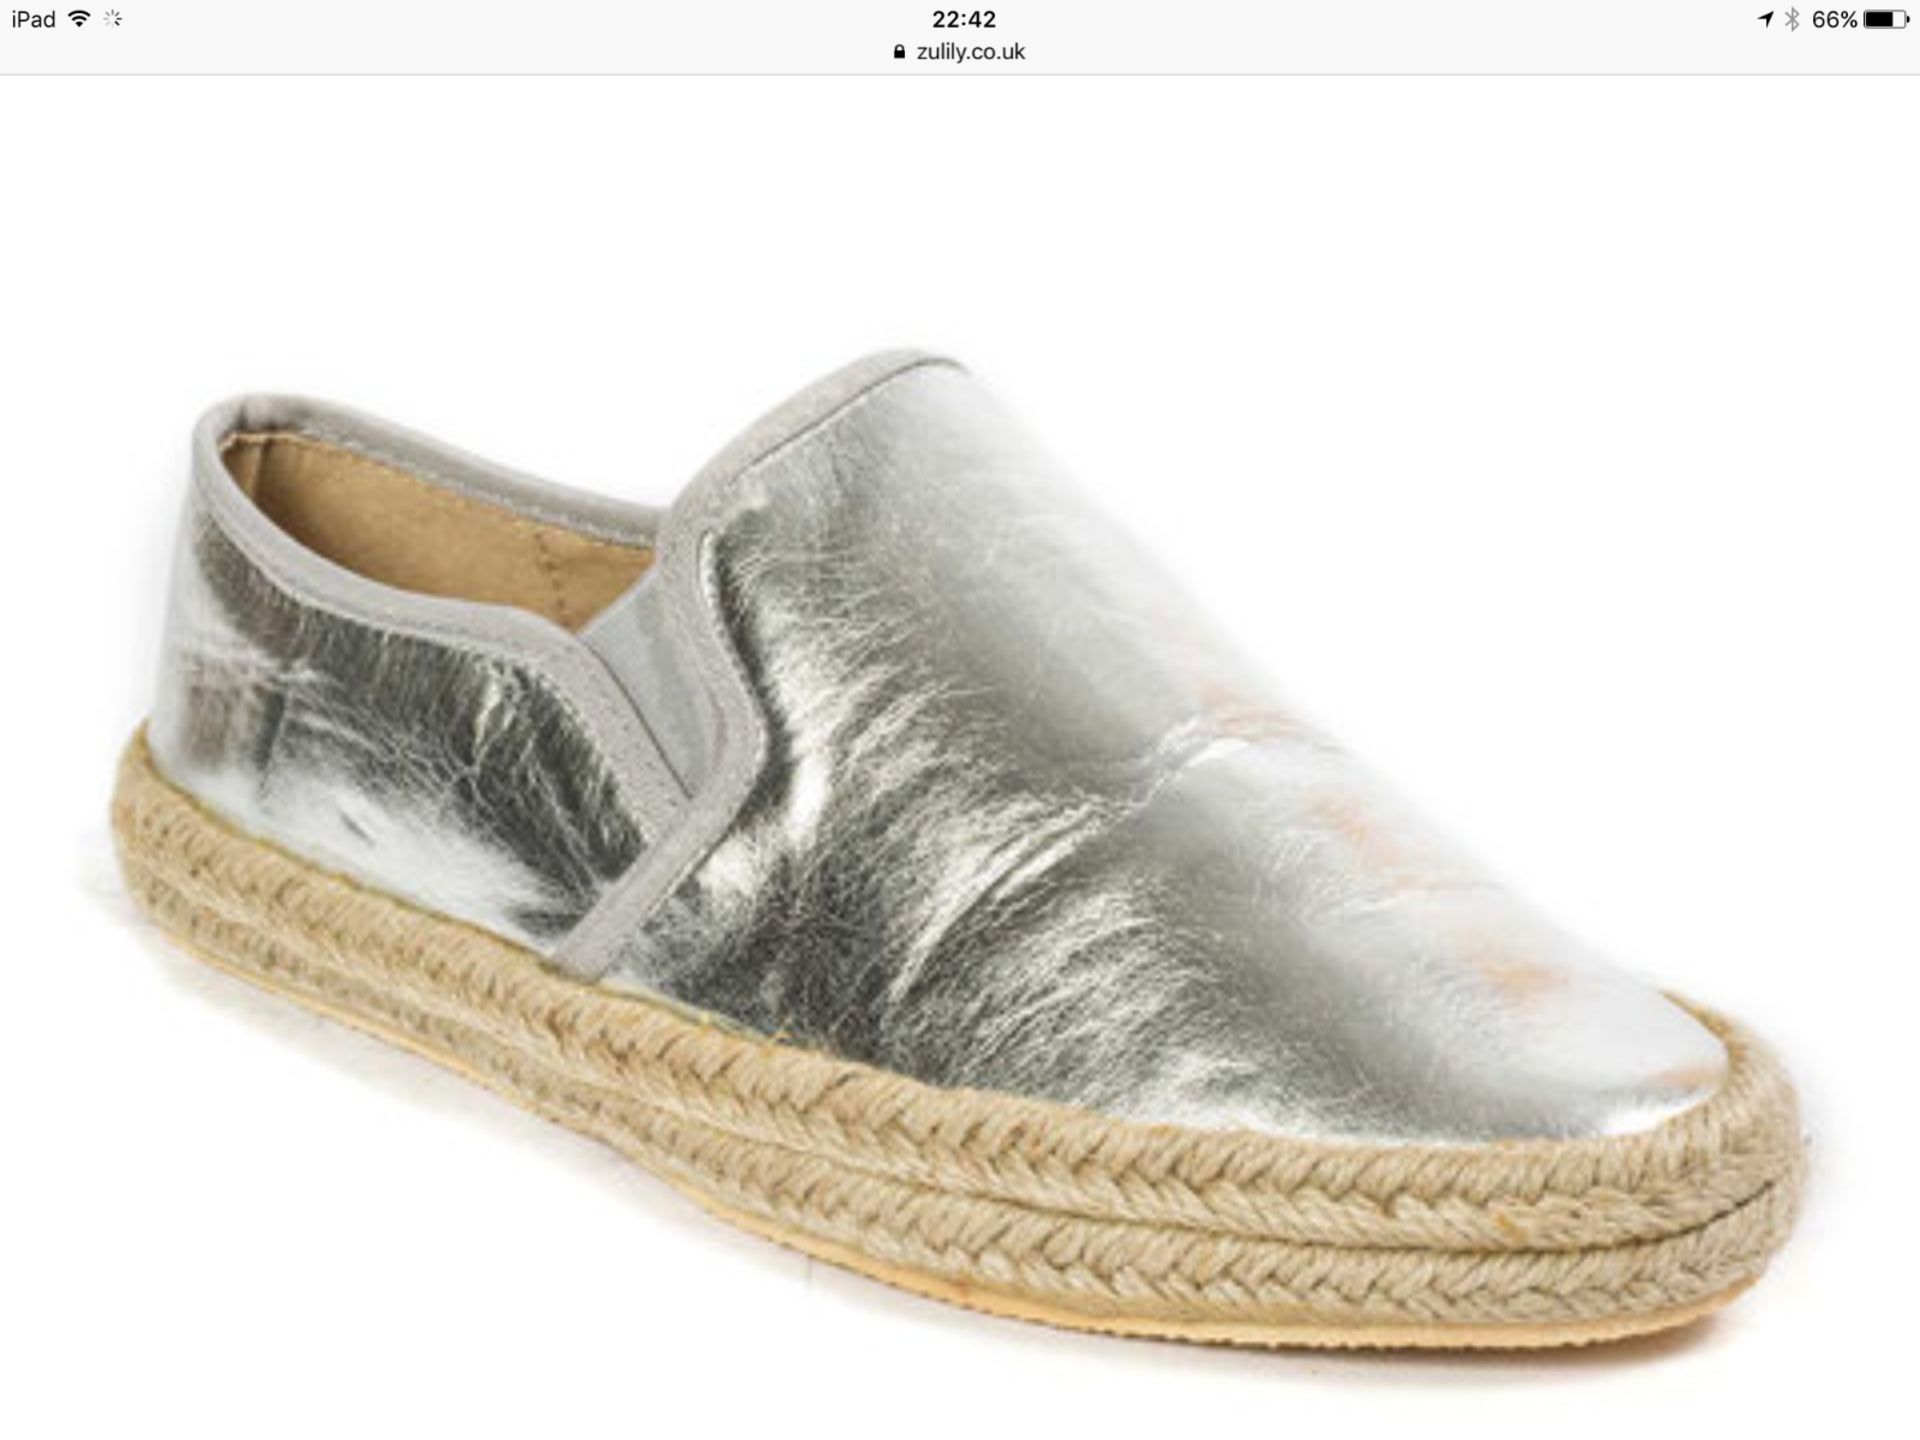 Pierre Dumas Silver Base Espadrille, Size UK 5/Eur 37-38, RRP £33.99 (New with box) [Ref: